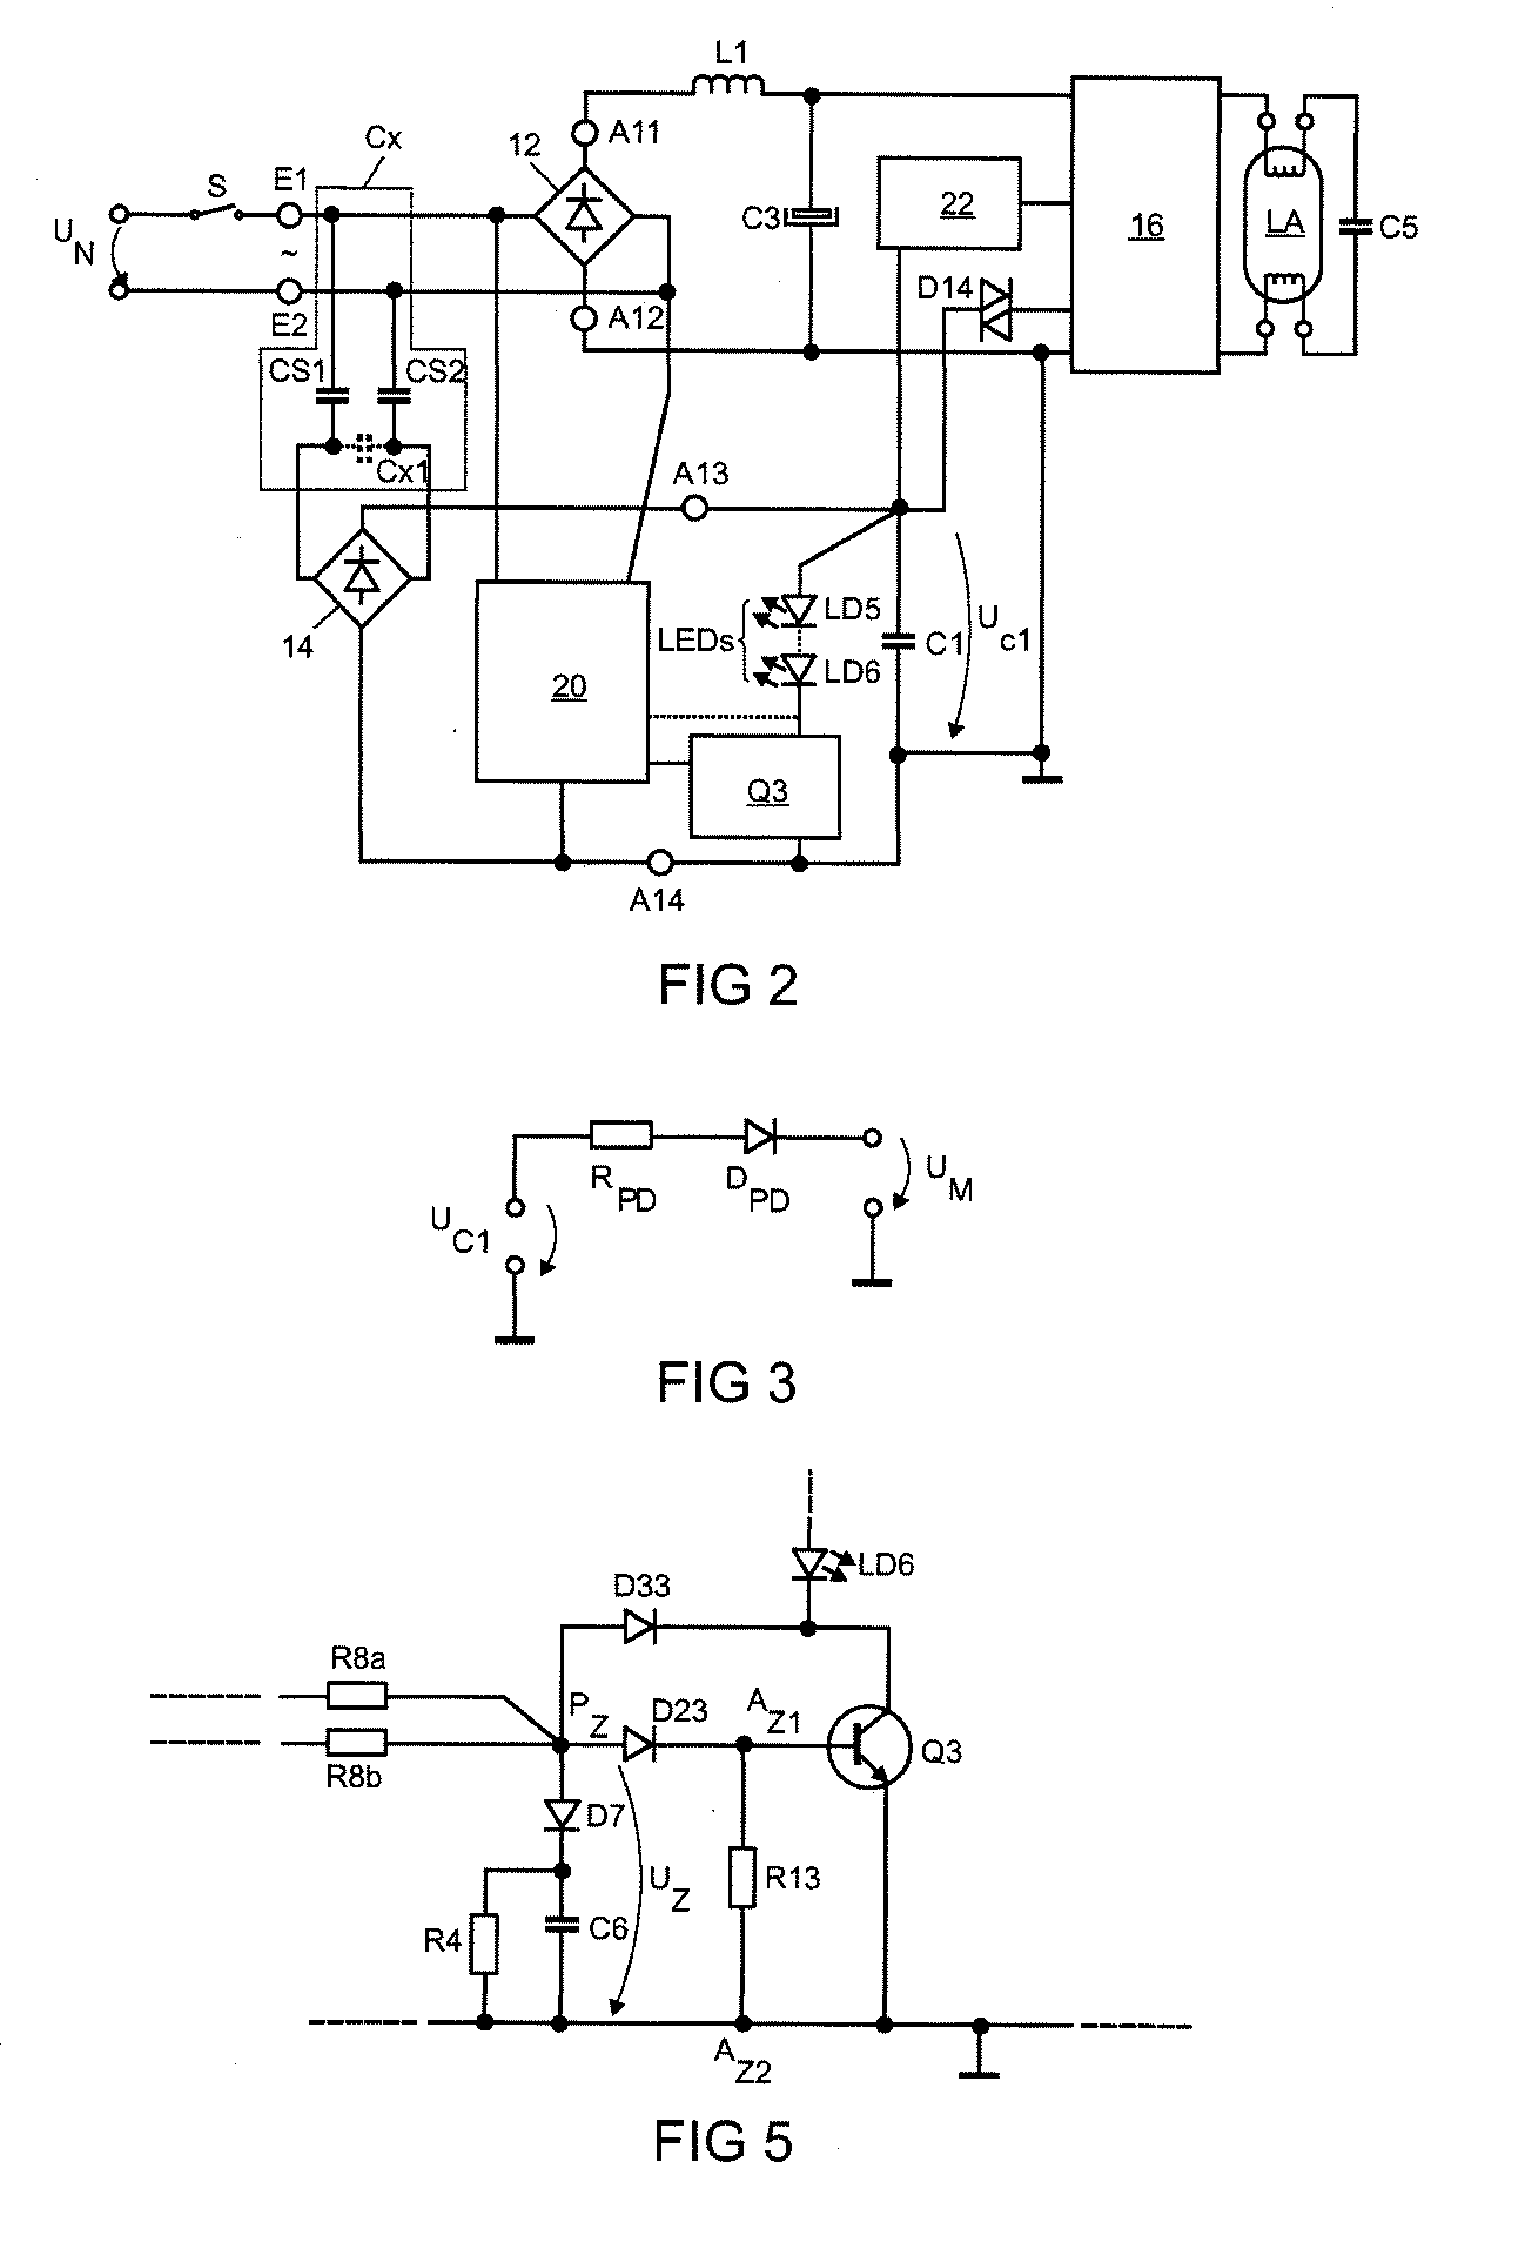 Circuit arrangement and method for operating at least one LED and at least one fluorescent lamp